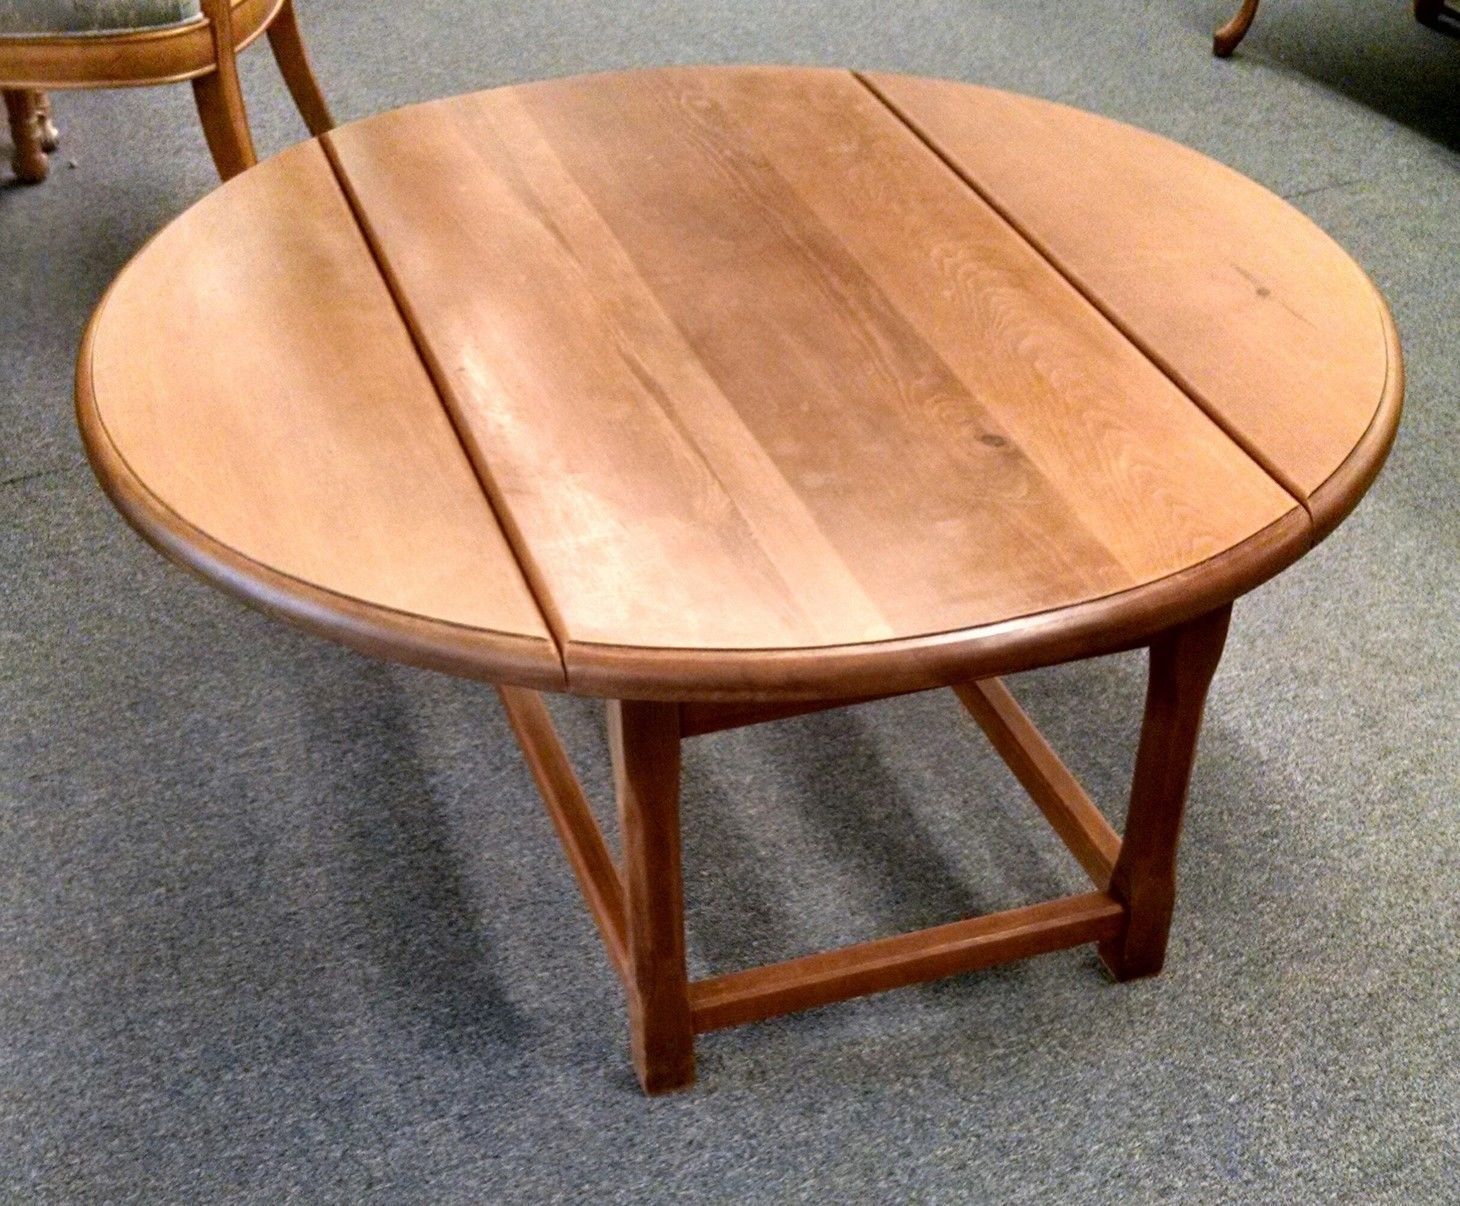 Oval Drop Leaf Coffee Table | Delmarva Furniture Consignment For Leaf Round Coffee Tables (View 3 of 15)